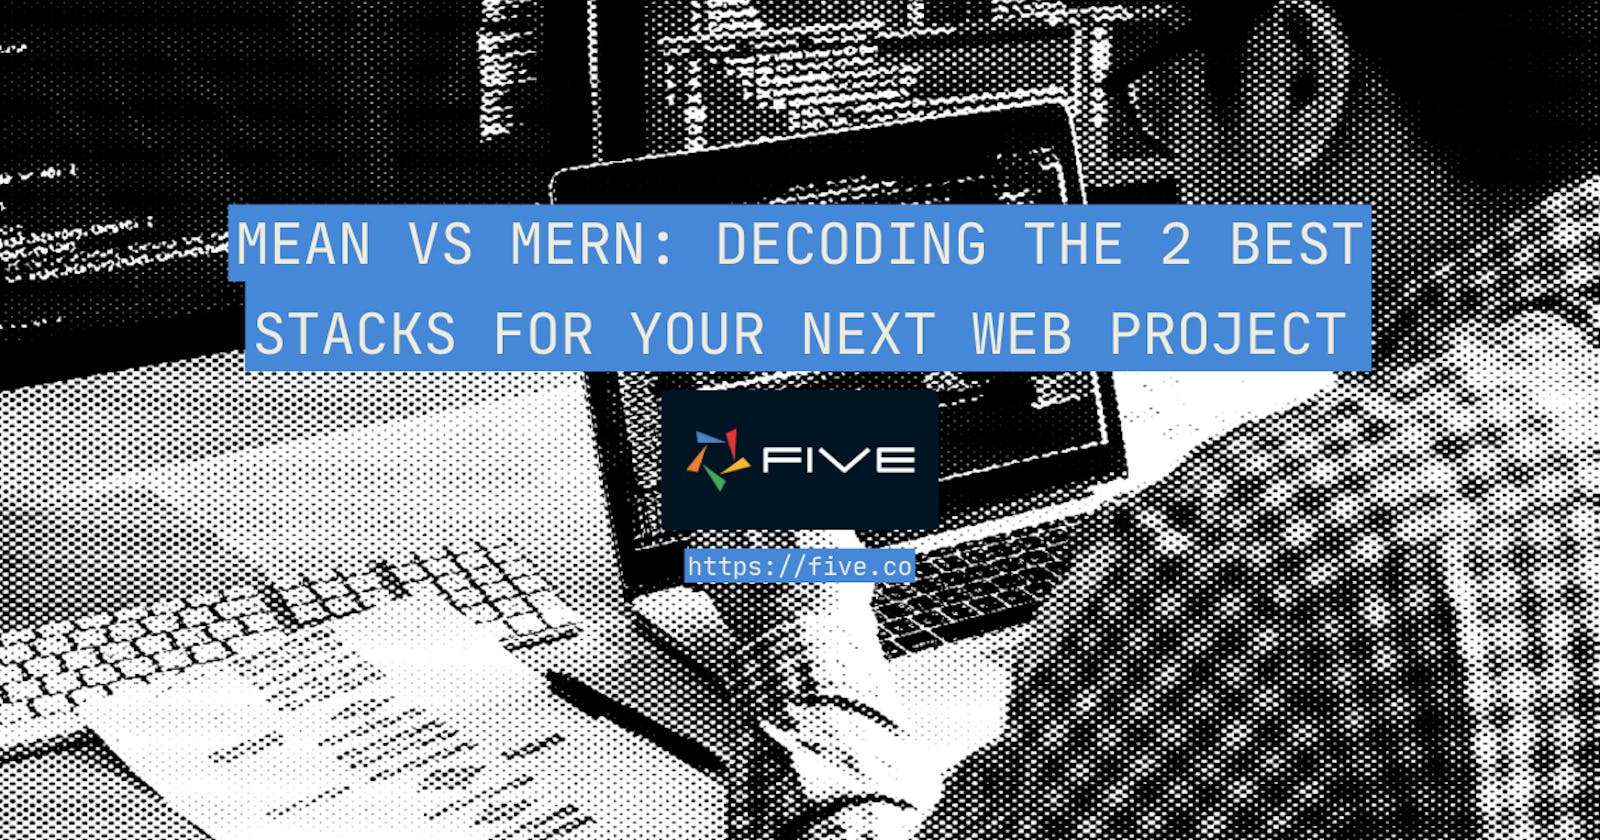 MEAN vs MERN: Decoding the 2 Best Stacks For Your Next Web Project